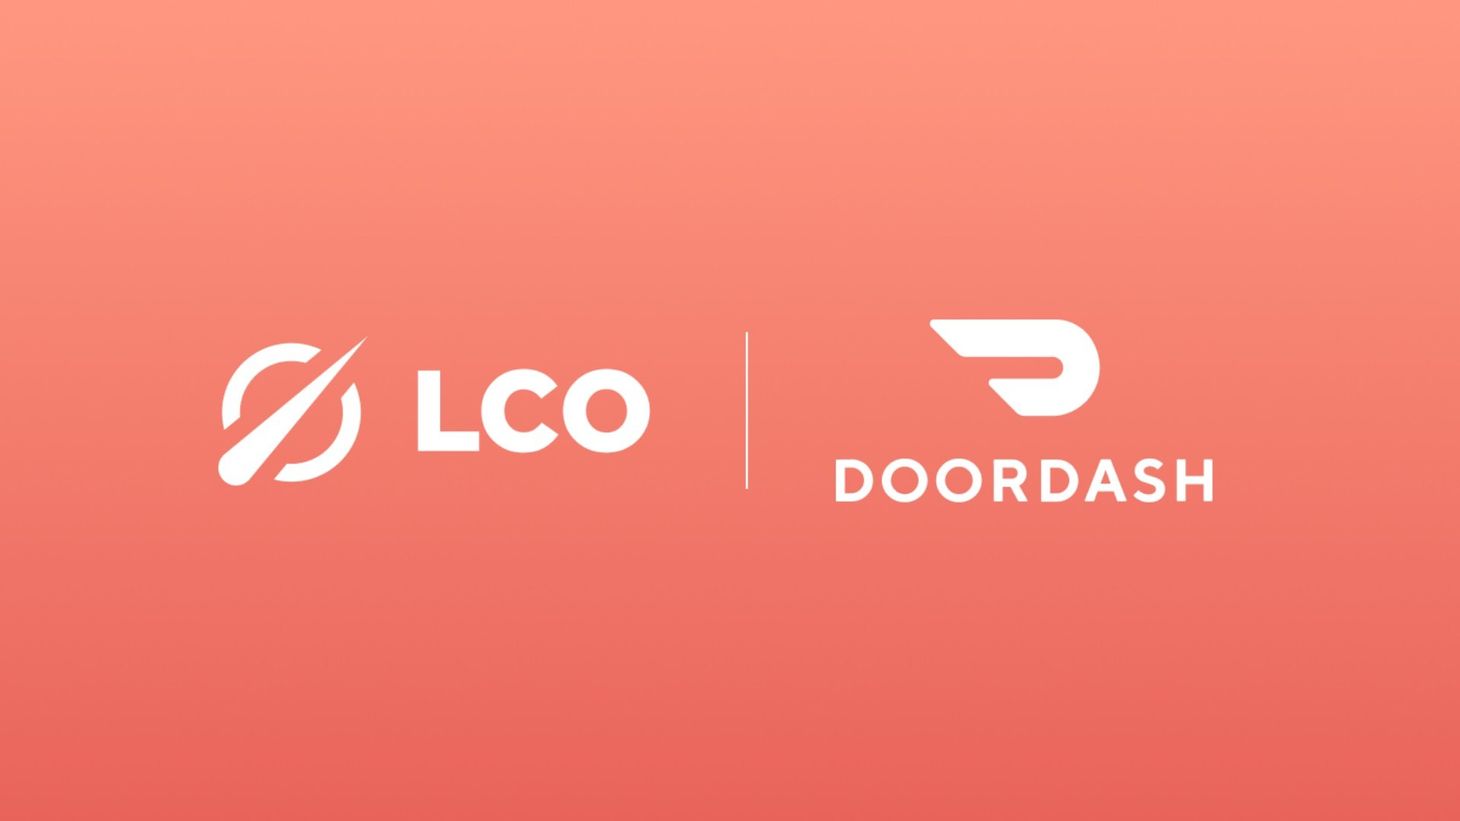 LCO ready to #sendit into Split 2 with new DoorDash naming rights sponsor